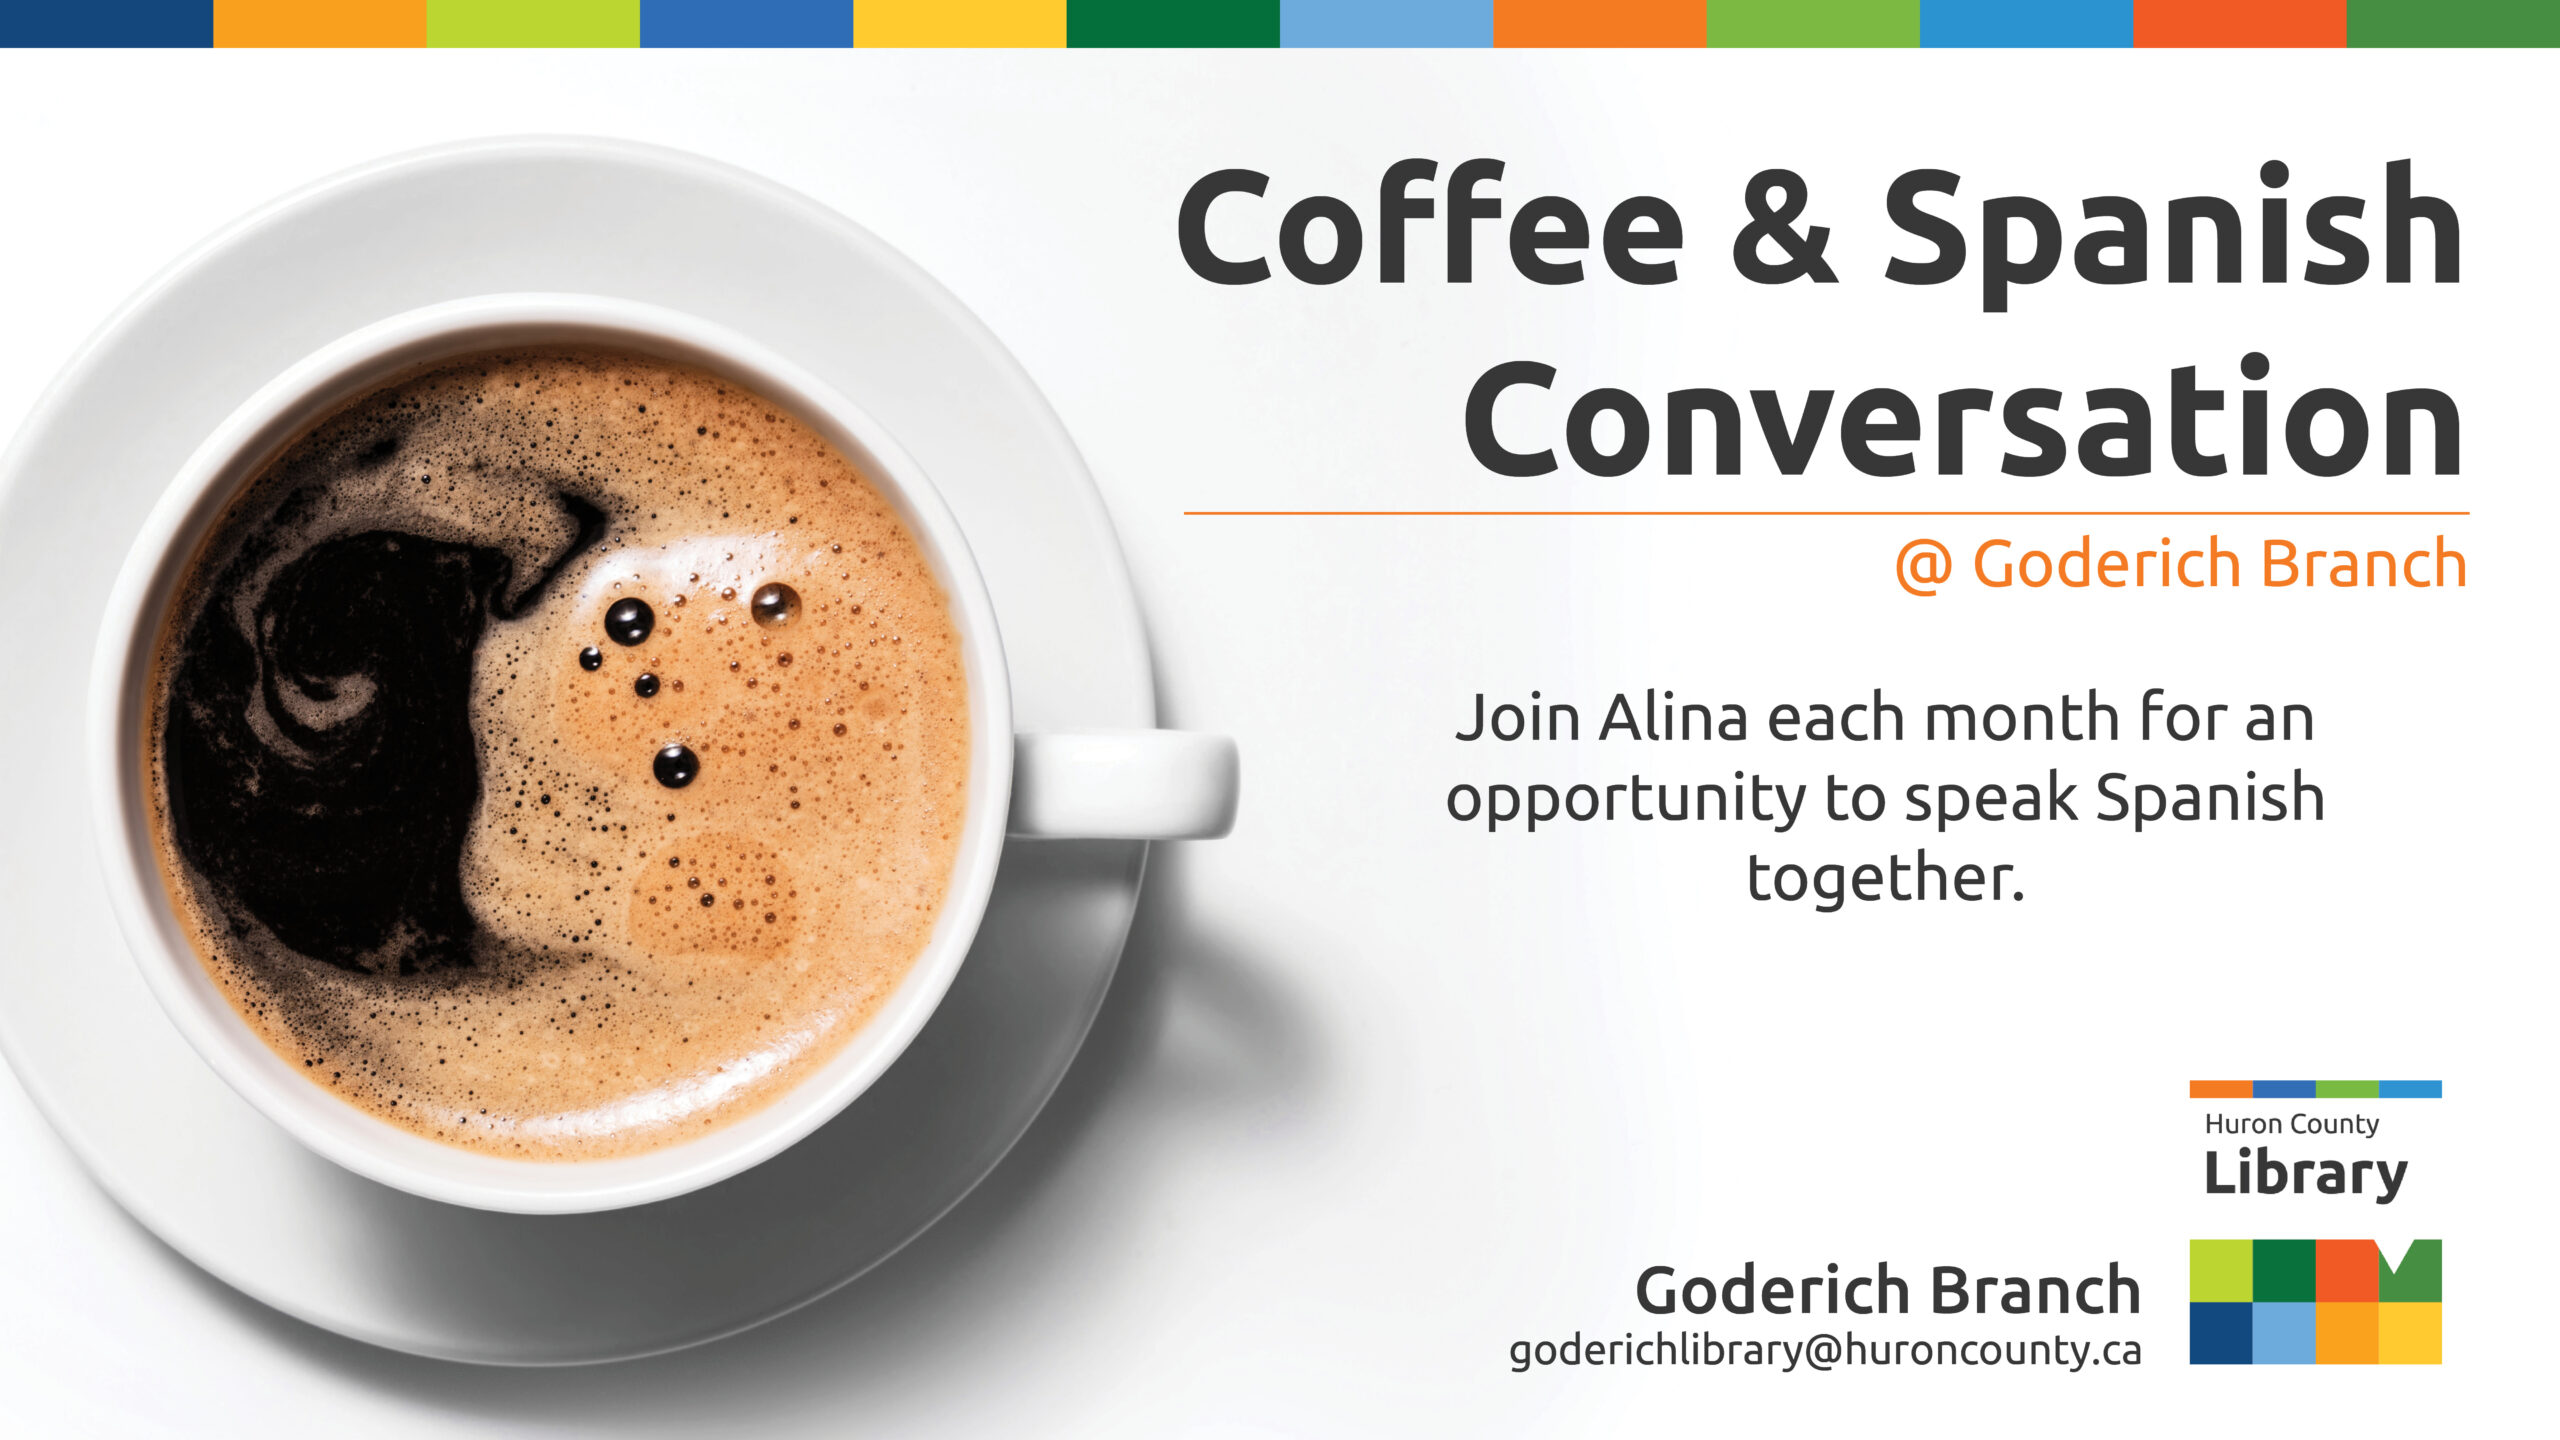 Photo of a cup of coffee with text promoting coffee and spanish conversation at Goderich